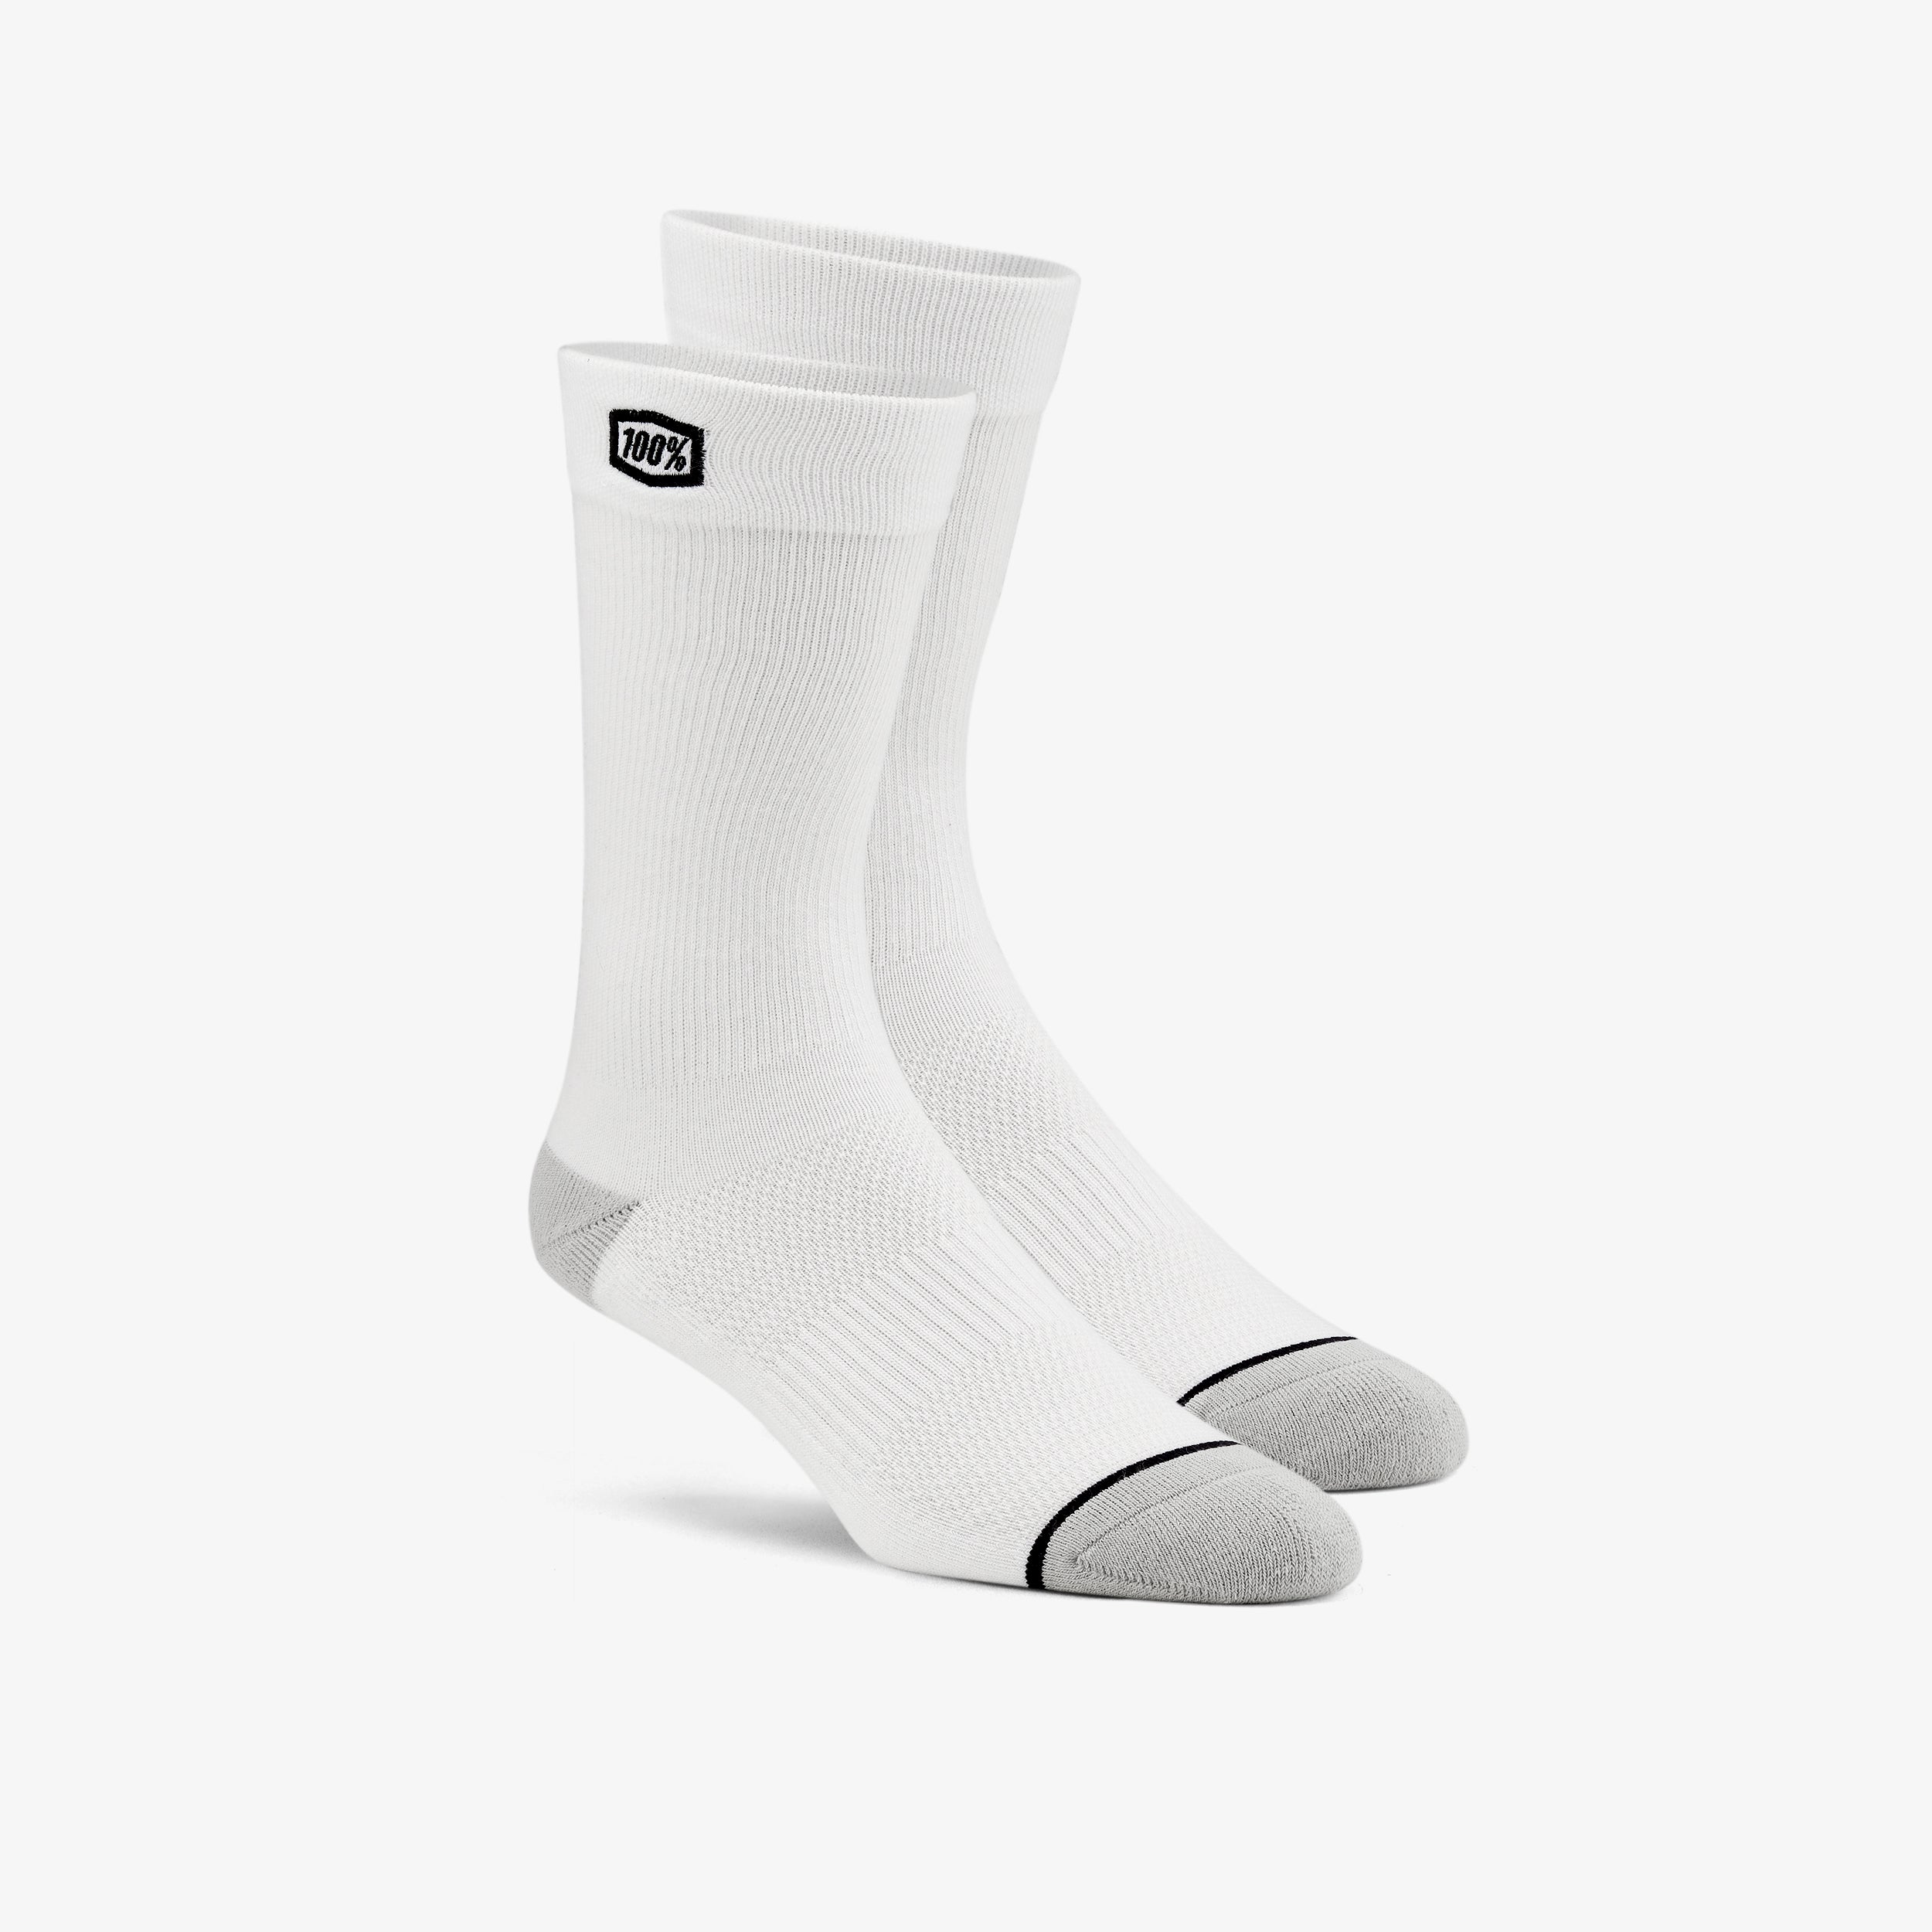 SOLID Casual Socks - White  - SP22